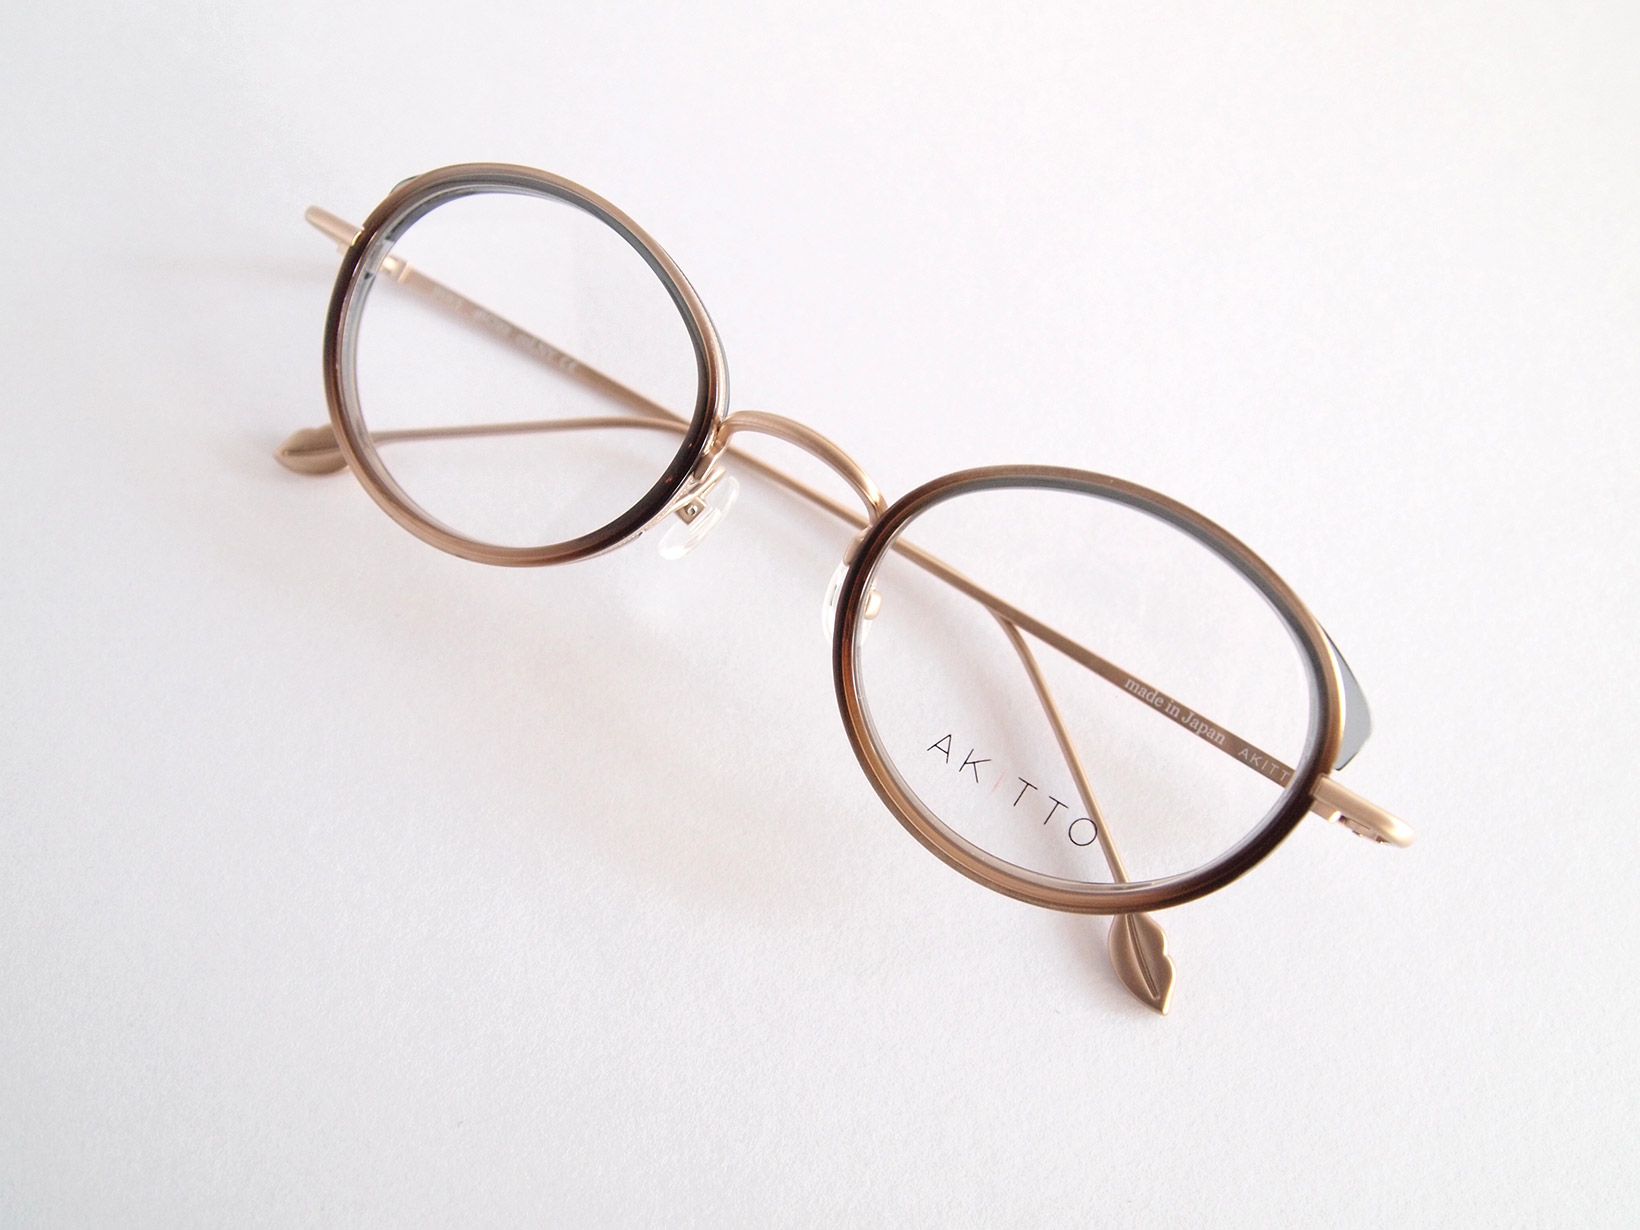 AKITTO 2018-1st pin3 color｜NY size:46□22 material:titanium+acetate price:42,000-(＋tax)